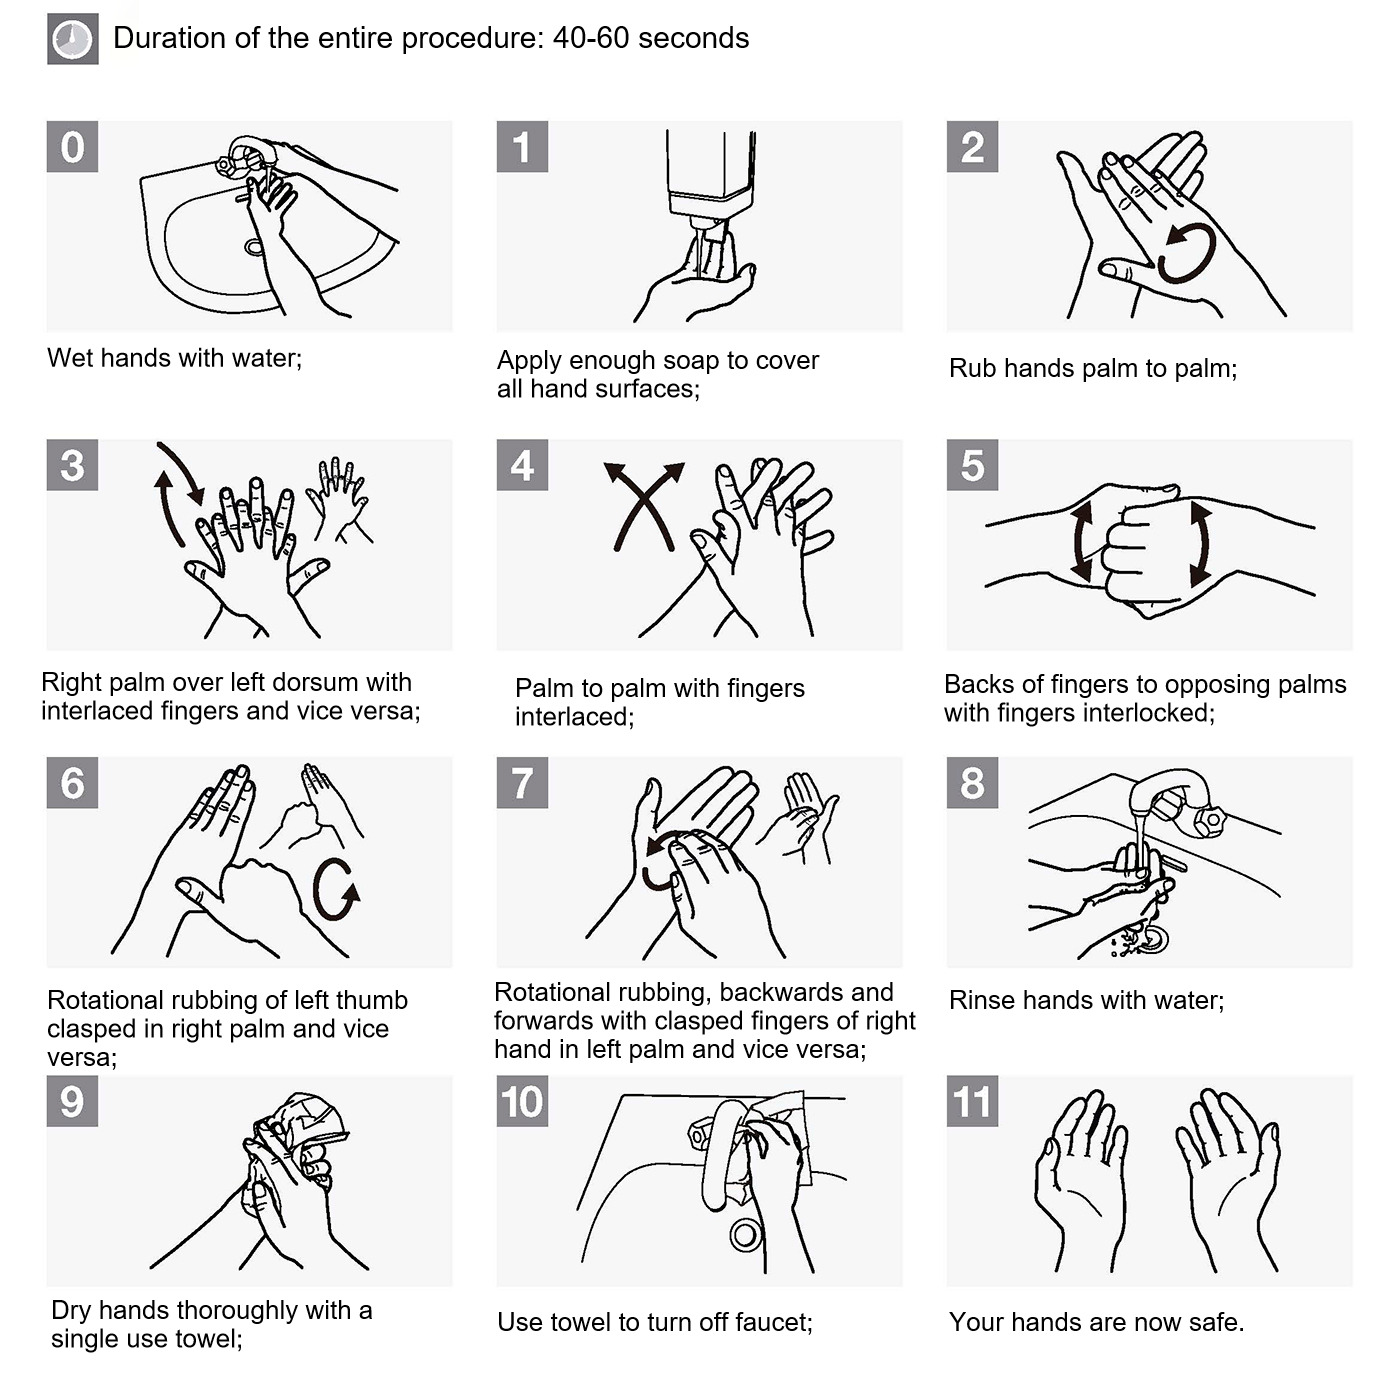 Washing your hands properly